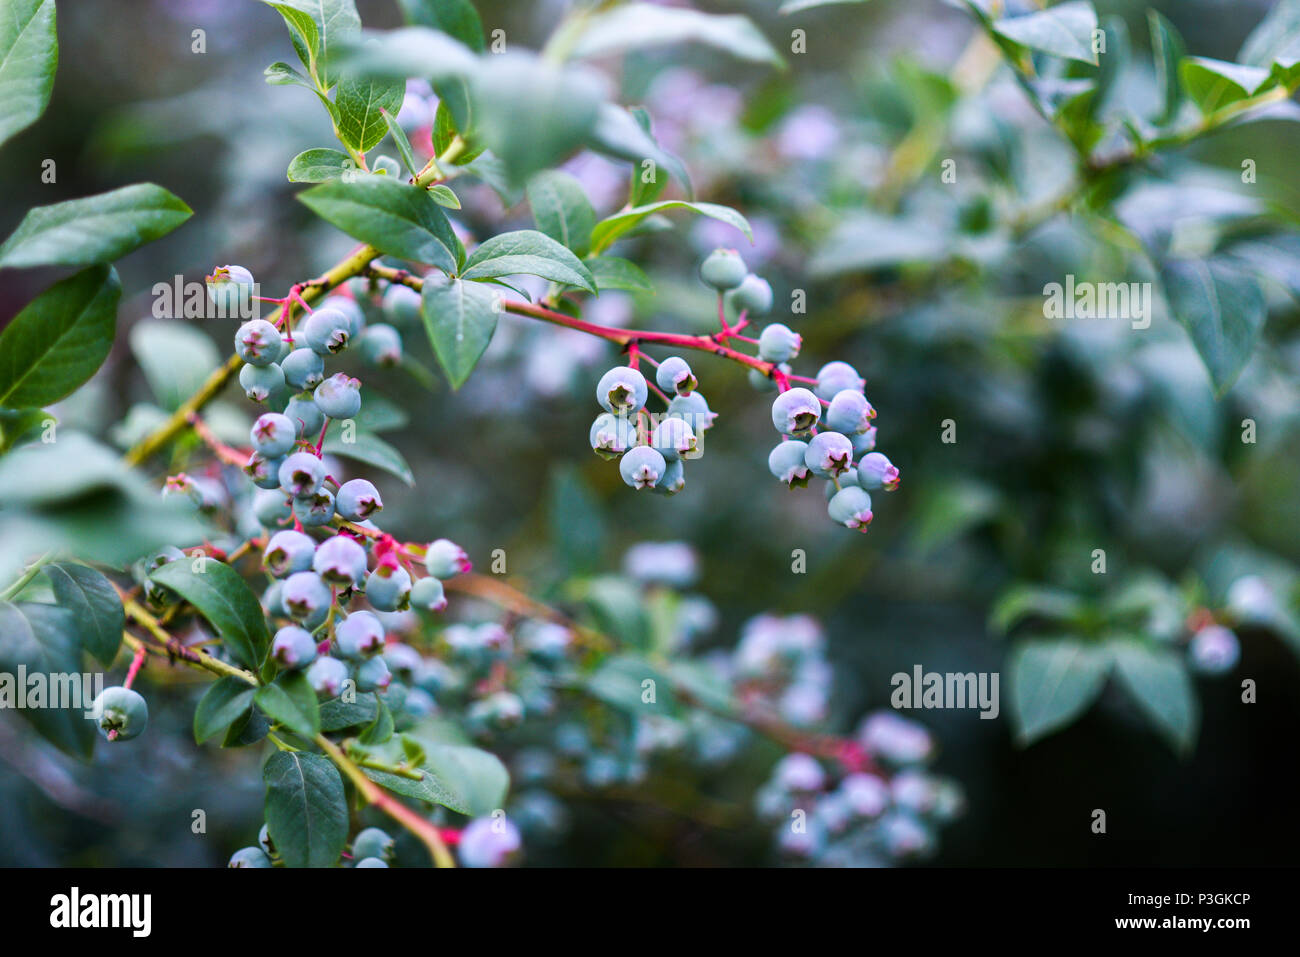 Ripening blueberries growing in the garden in the summer. Stock Photo